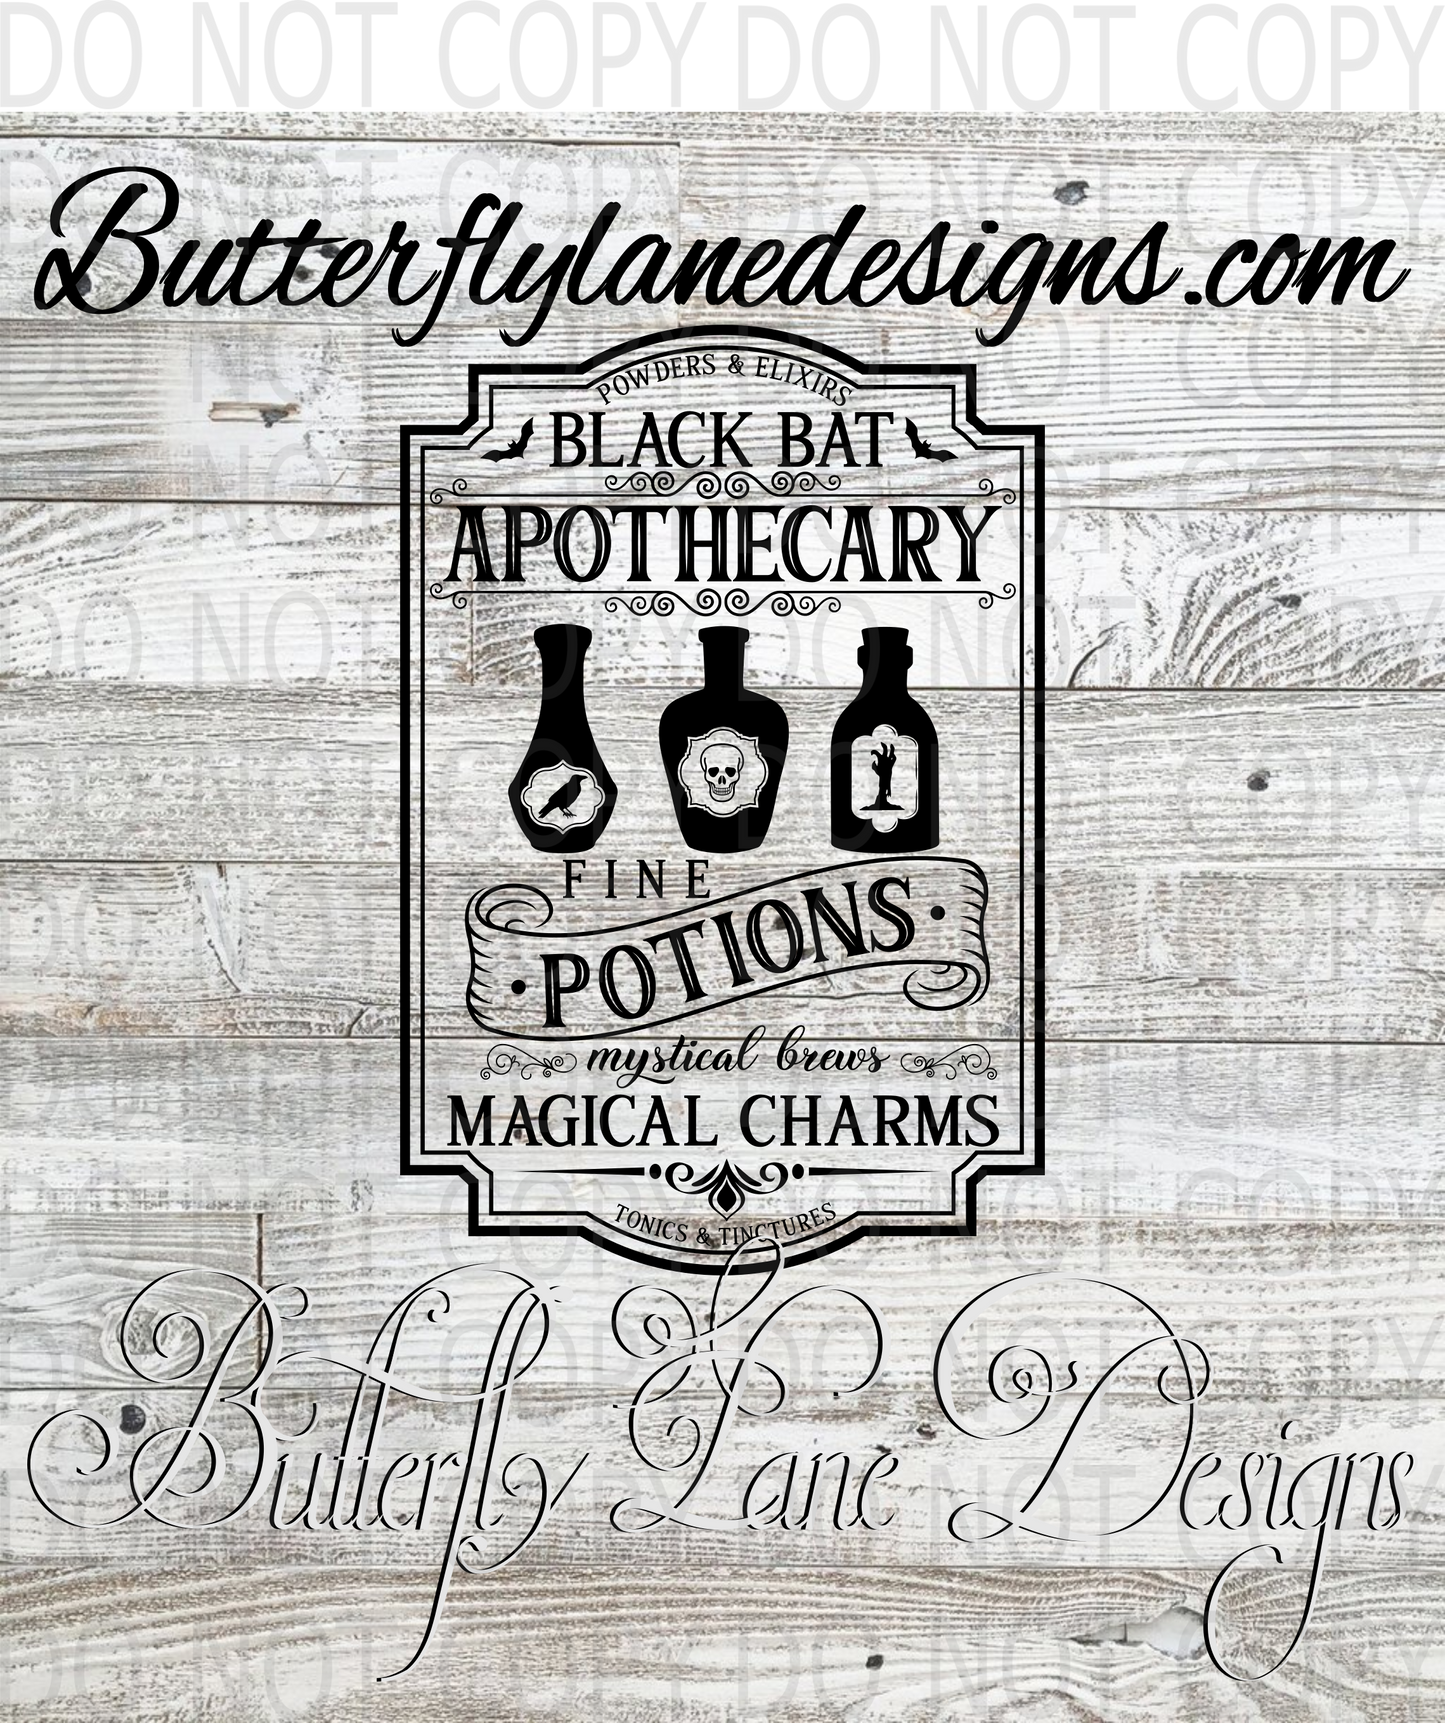 Black Bat fine potions; magical charms- :: Clear Decal :: VC Decal